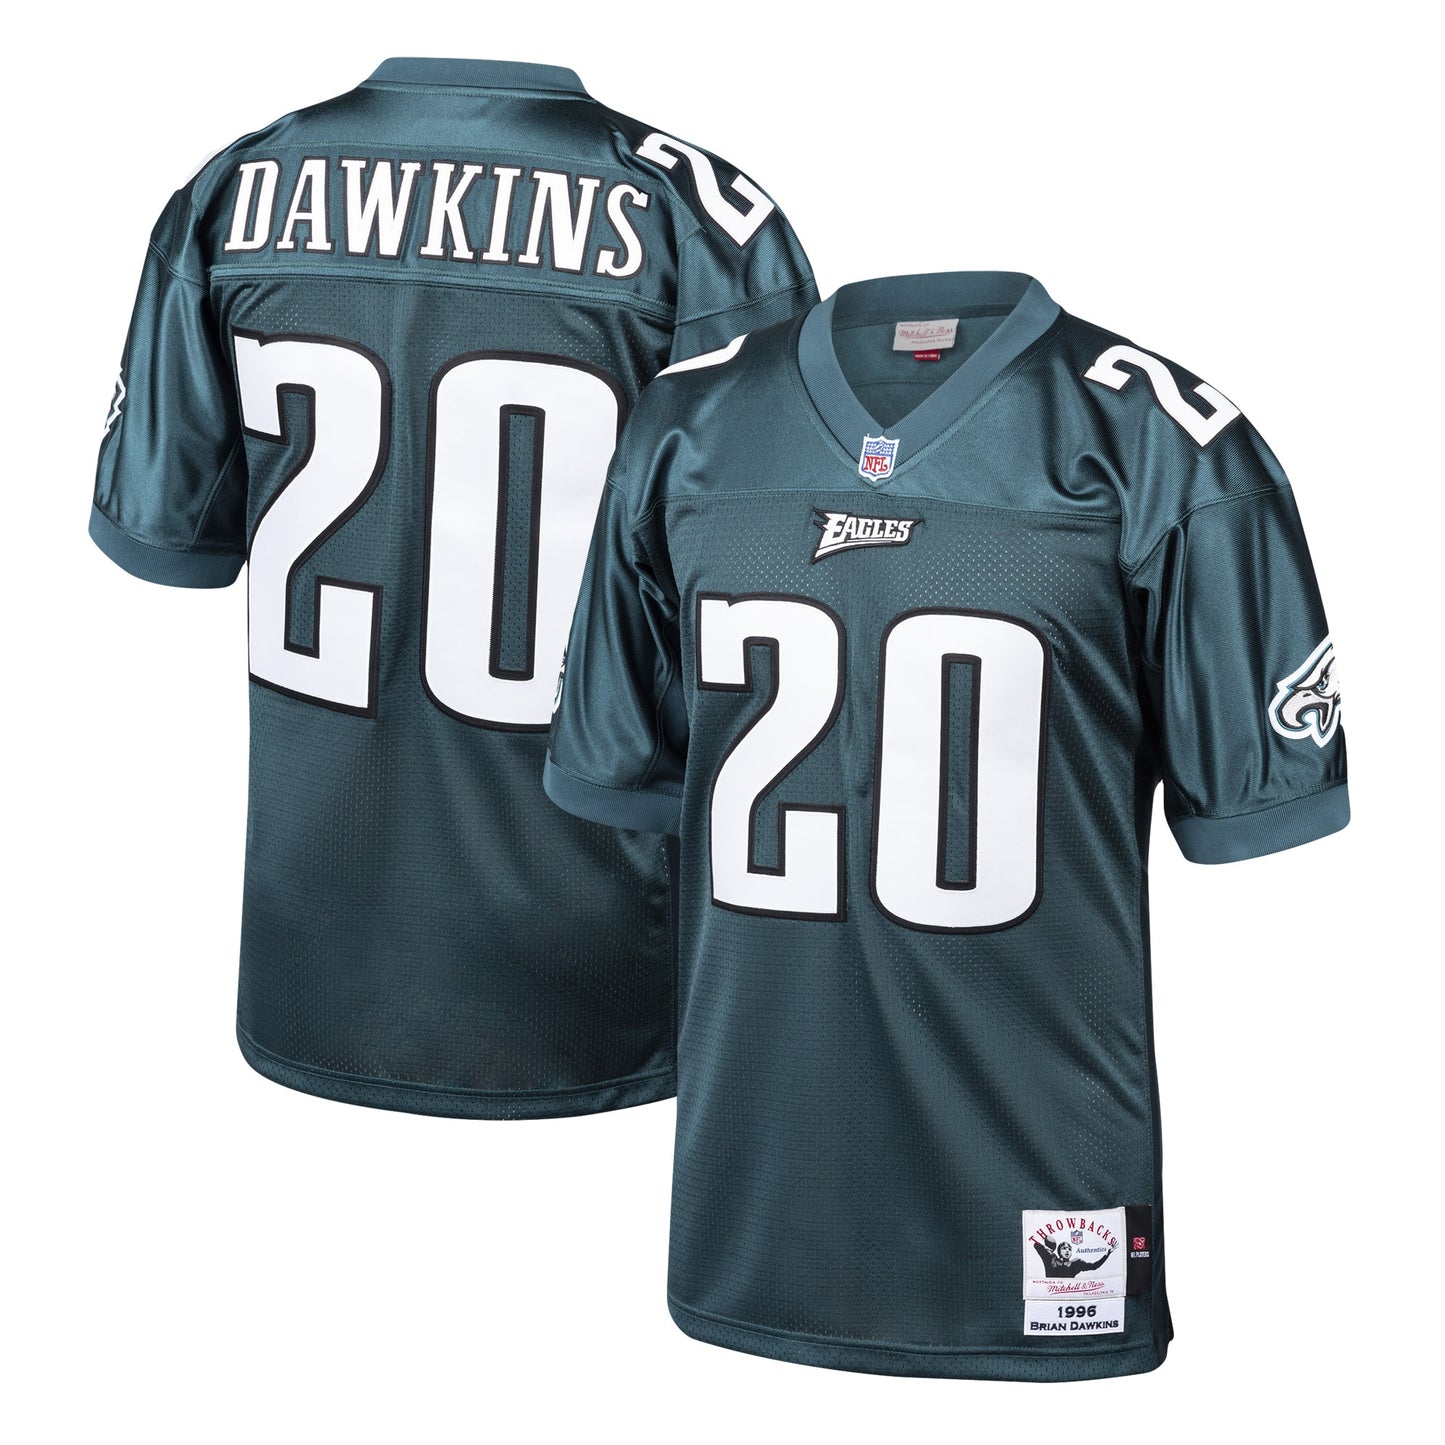 Brian Dawkins Philadelphia Eagles Mitchell & Ness 1996 Authentic Throwback Retired Player Jersey - Midnight Green